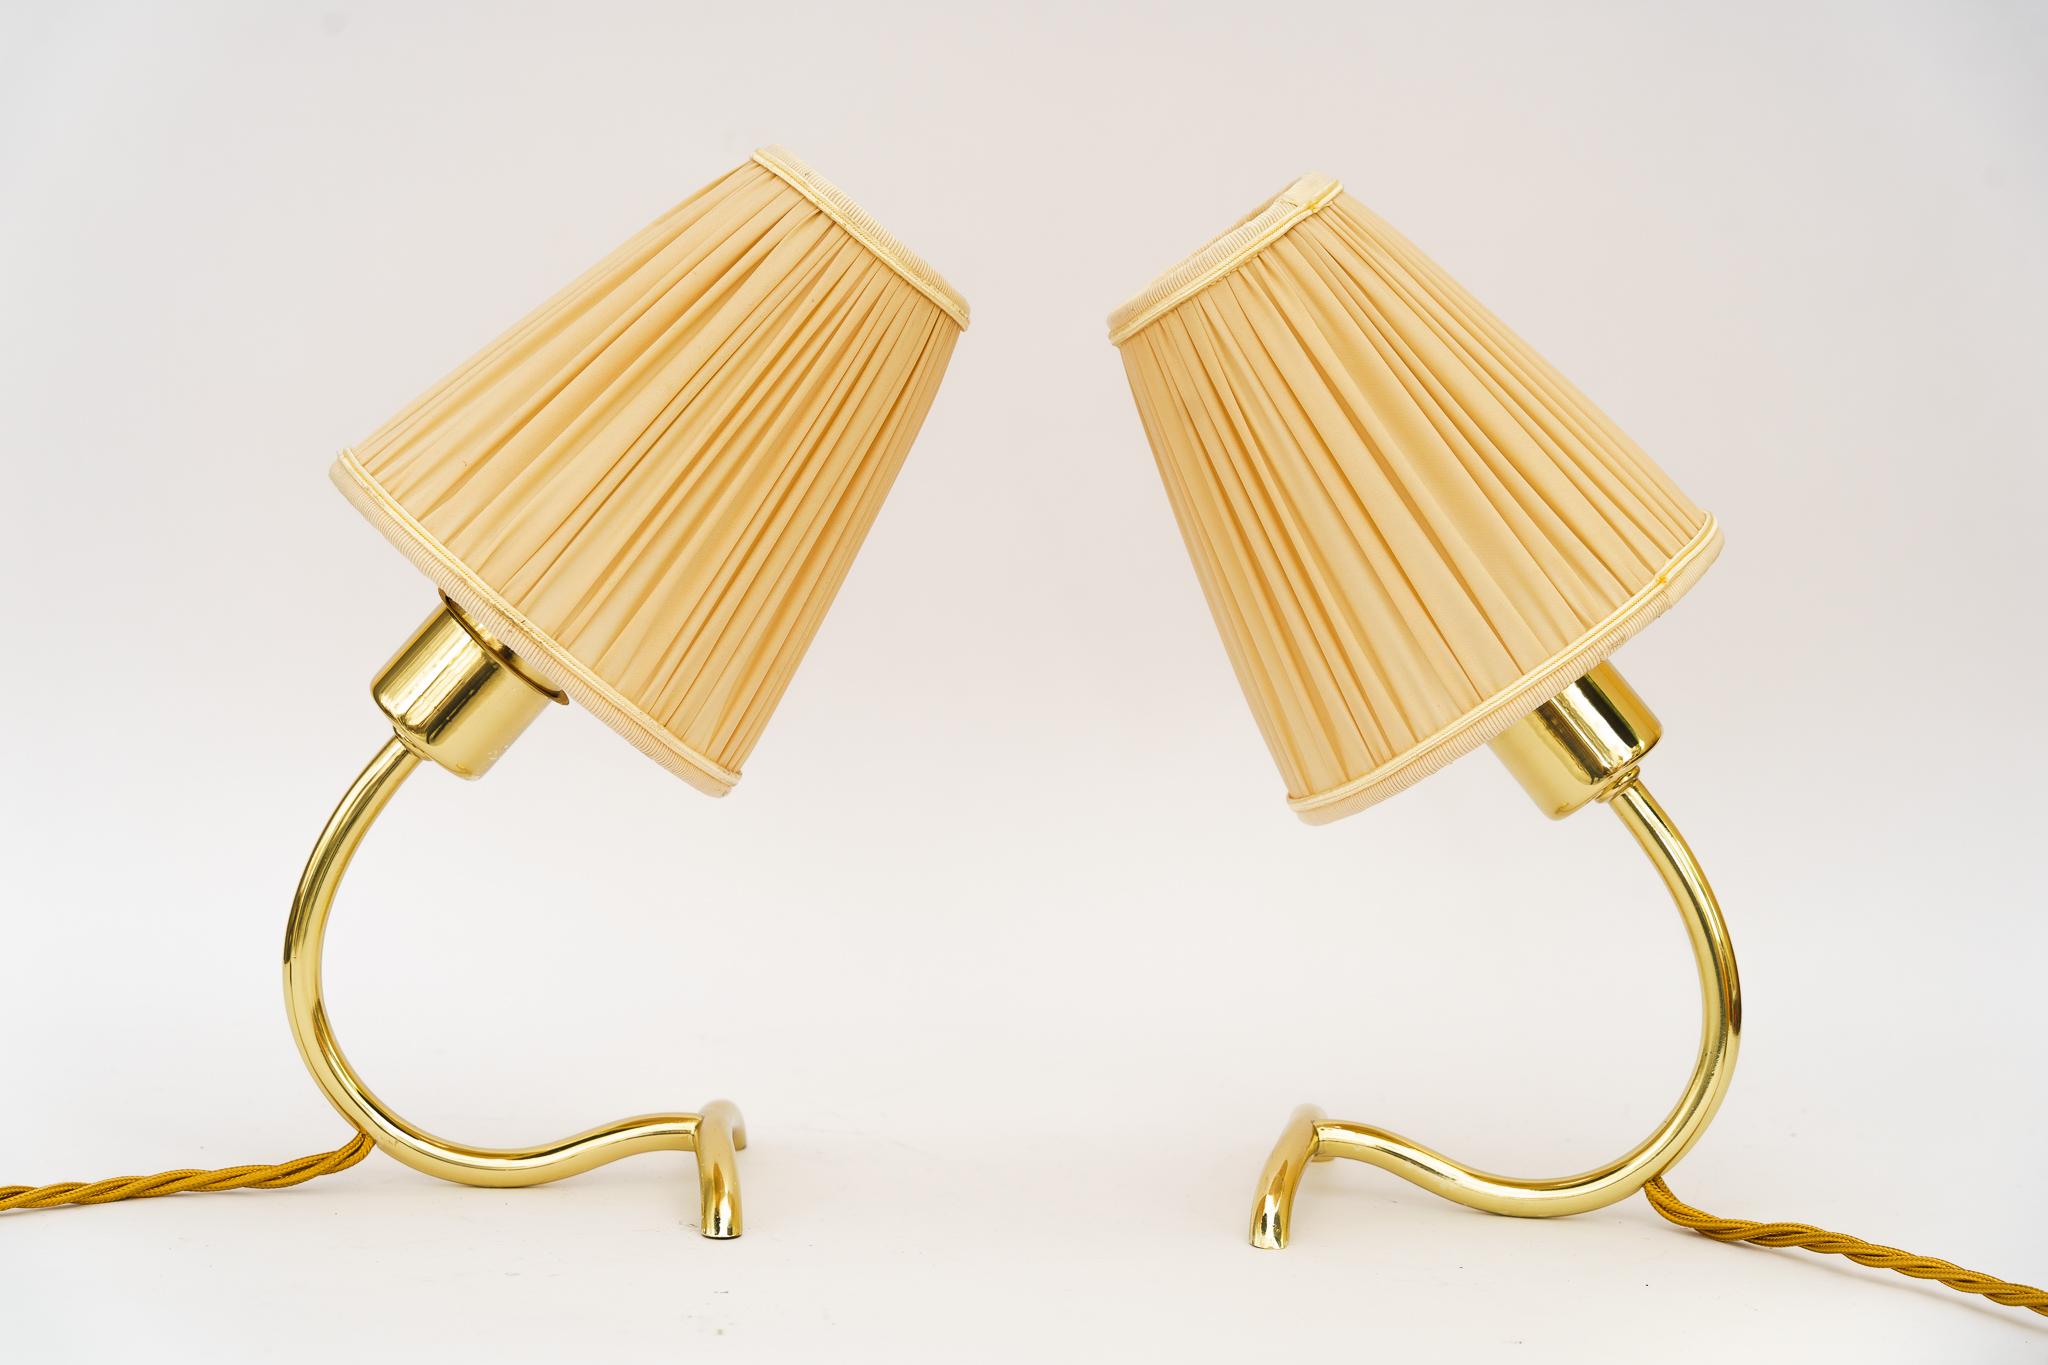 Pair of Table Lamps Rebhuhn by J.T. Kalmar
Brass polished and stove enameled
The fabric shades are replaced ( new )